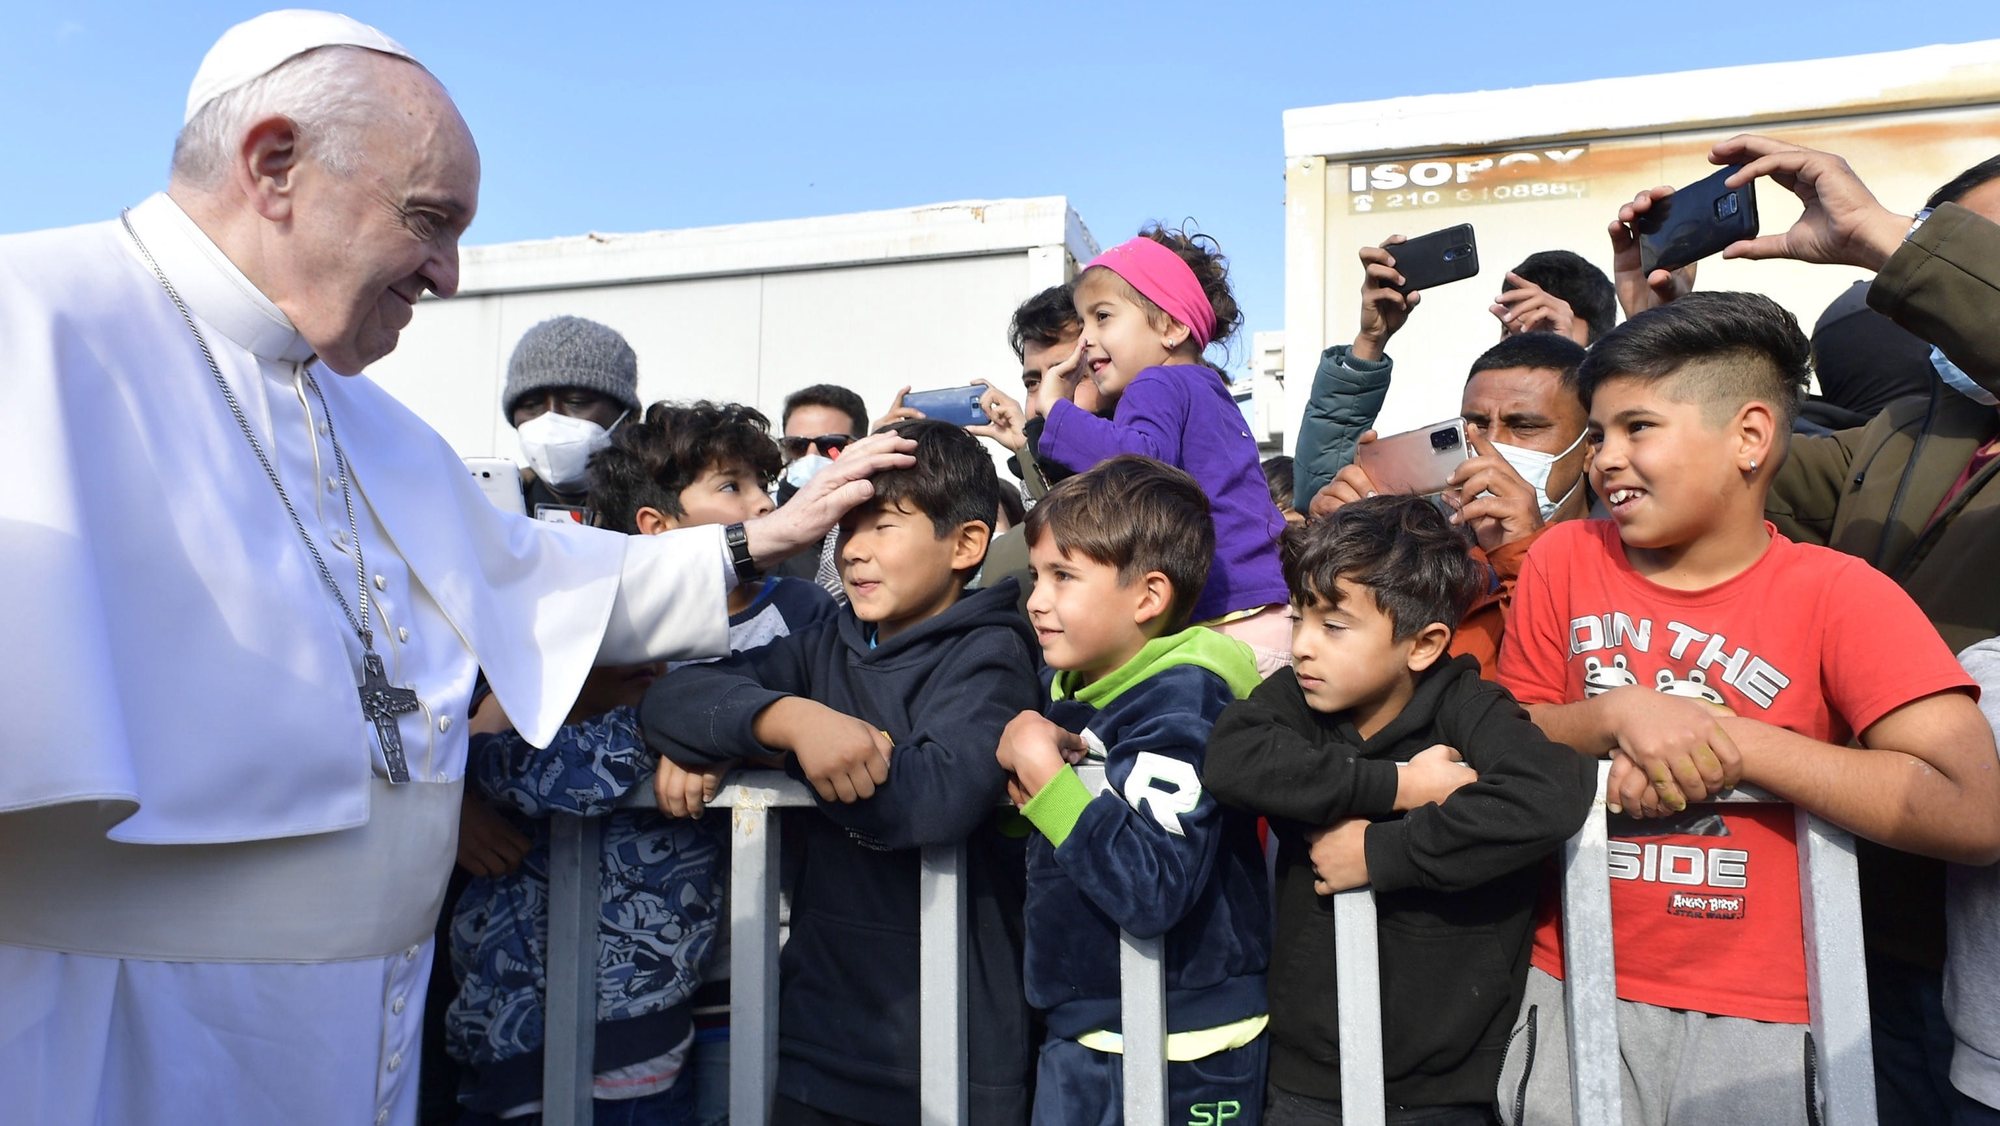 epa09623065 A handout picture provided by the Vatican Media shows Pope Francis blessing a boy at the Reception and Identification Centre (RIC) in Mytilene on the island of Lesbos, Greece 05 December 2021. Pope Francis returned to the island of Lesbos, the migration flashpoint he first visited in 2016, to plead for better treatment of refugees as attitudes towards migrants harden across Europe.  EPA/VATICAN MEDIA HANDOUT  HANDOUT EDITORIAL USE ONLY/NO SALES